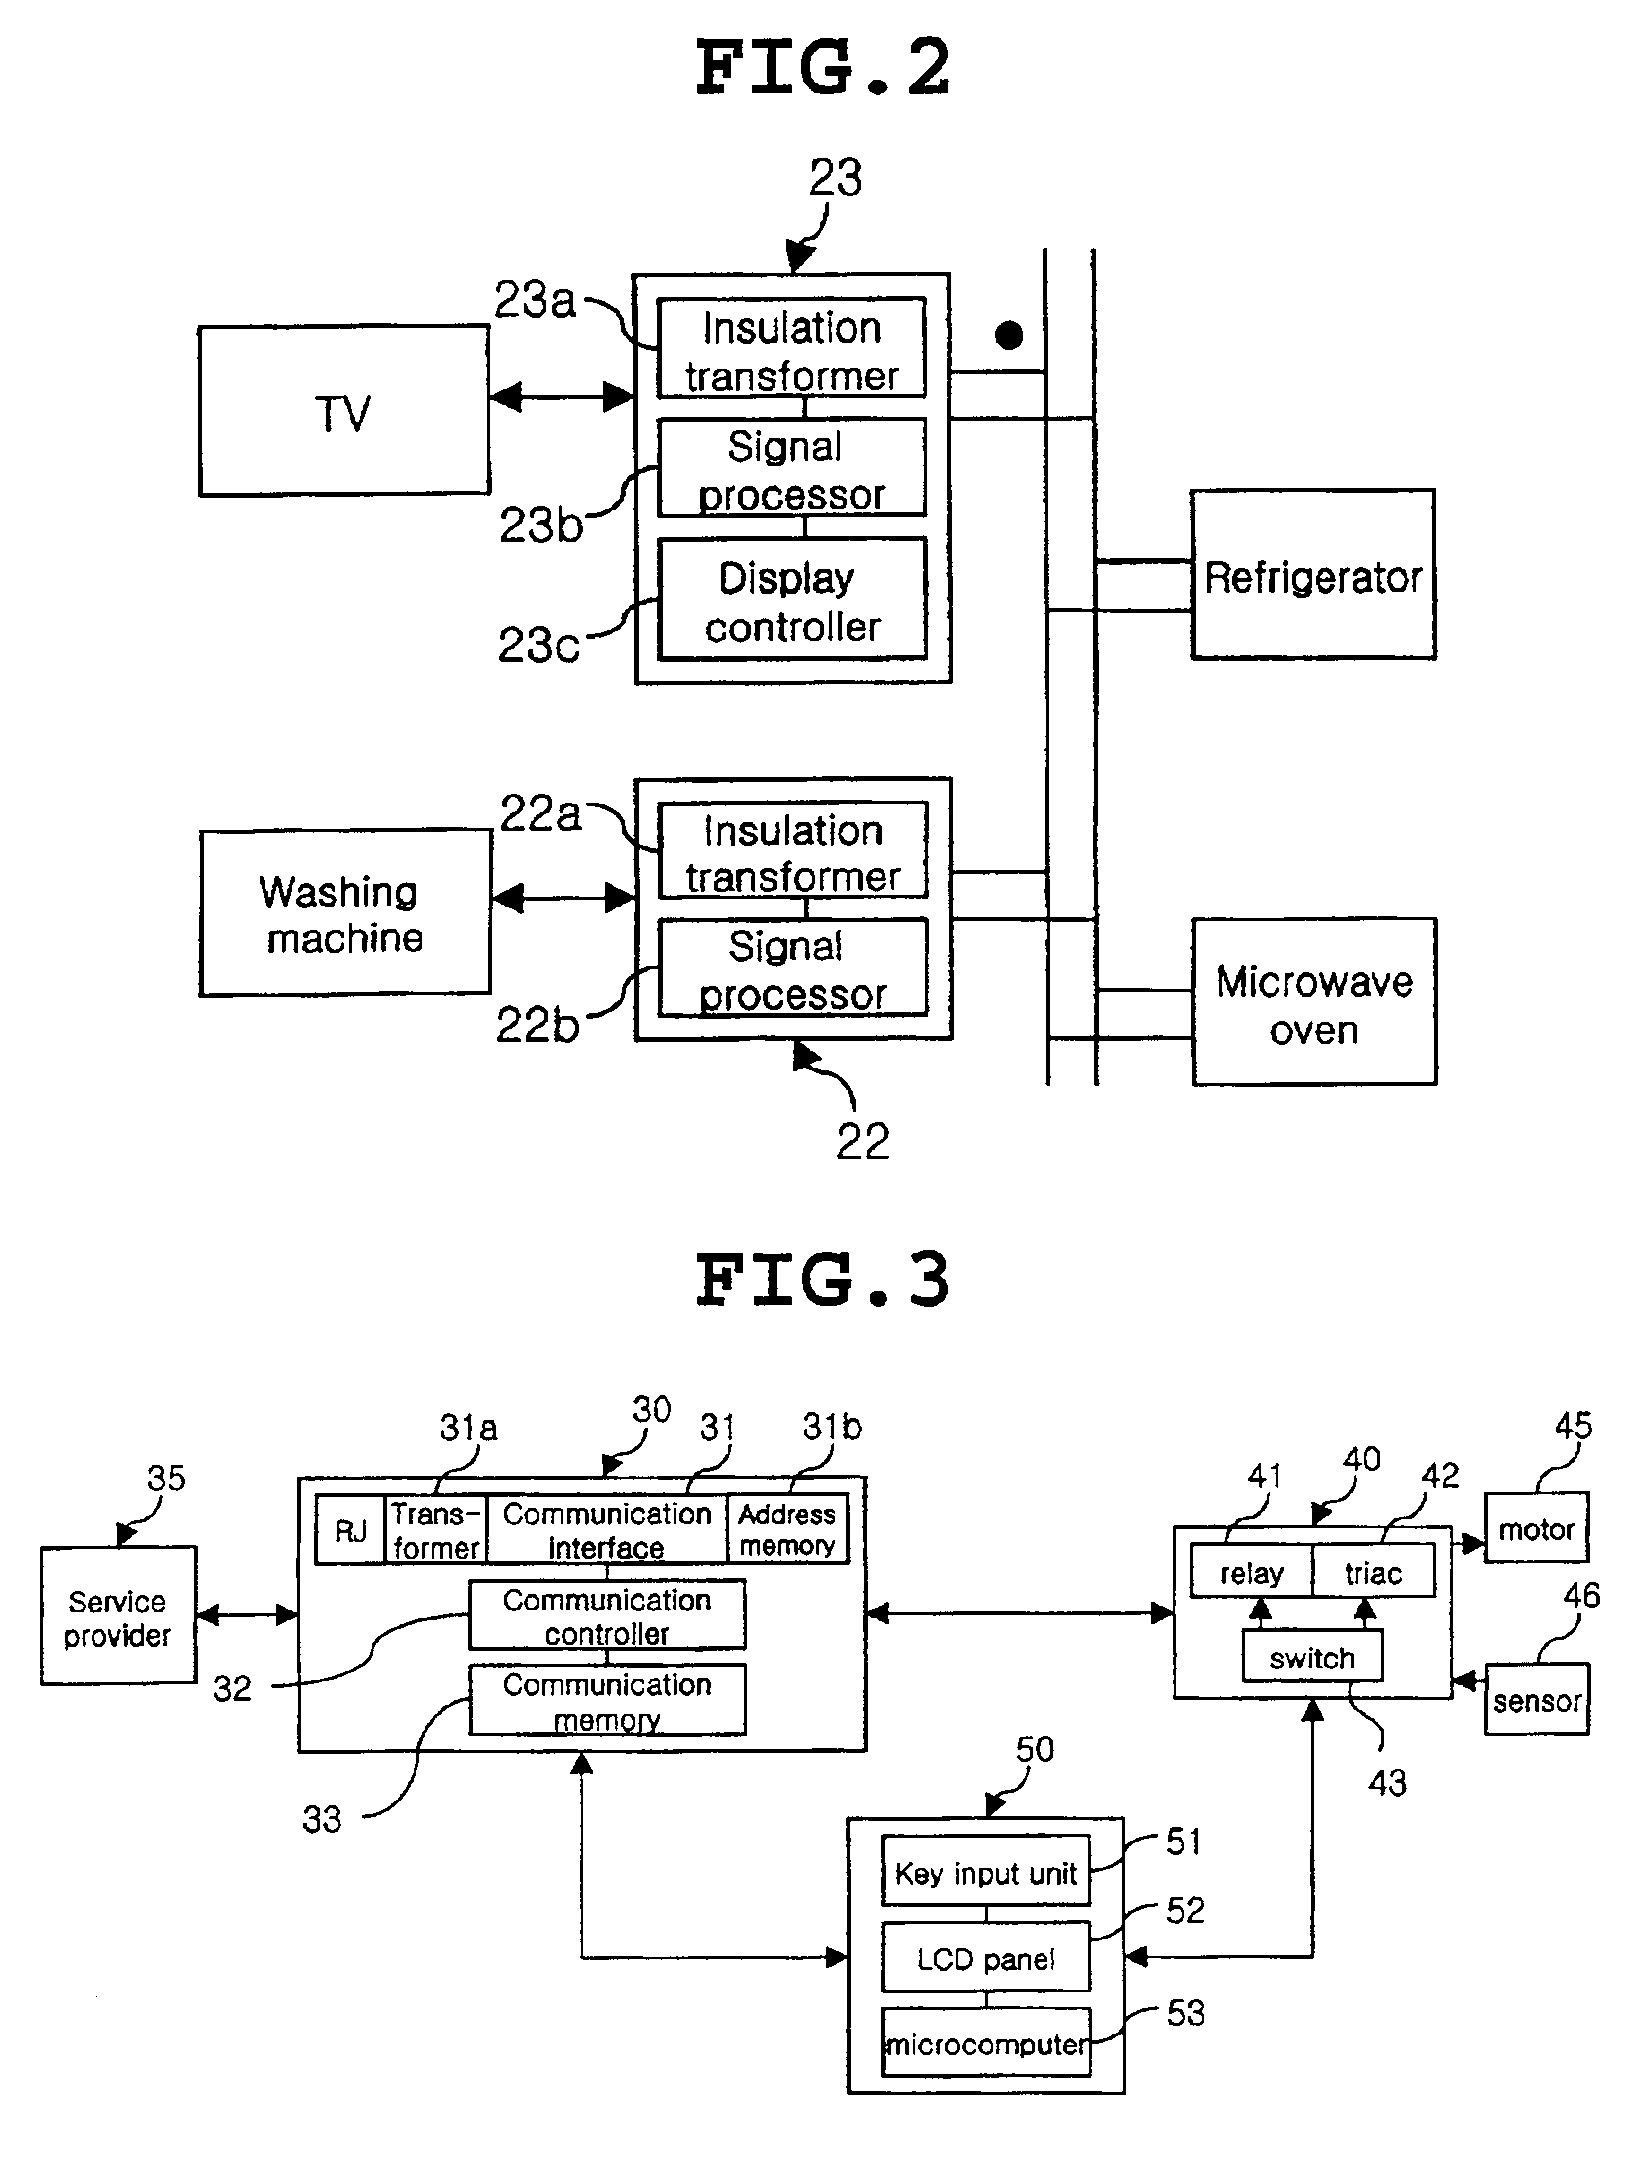 Apparatus and method for remotely controlling household appliances